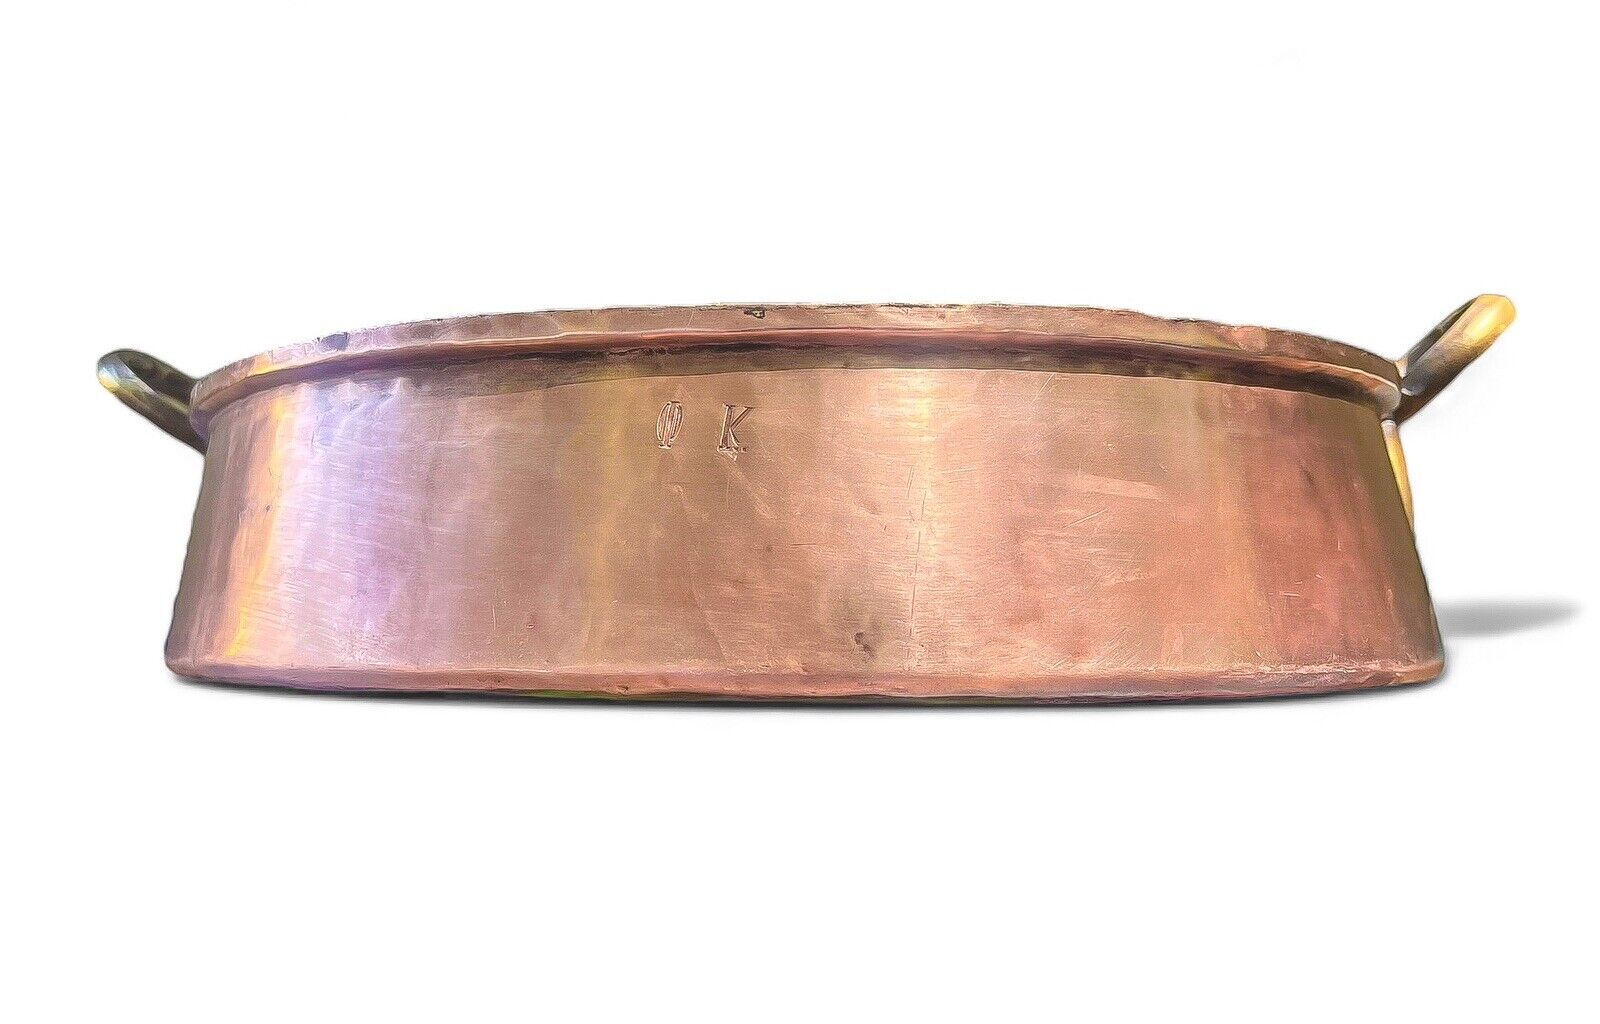 Antique Russian Tsarist? STAMPED Copper Pan With Brass Handles 15” Hand Forged